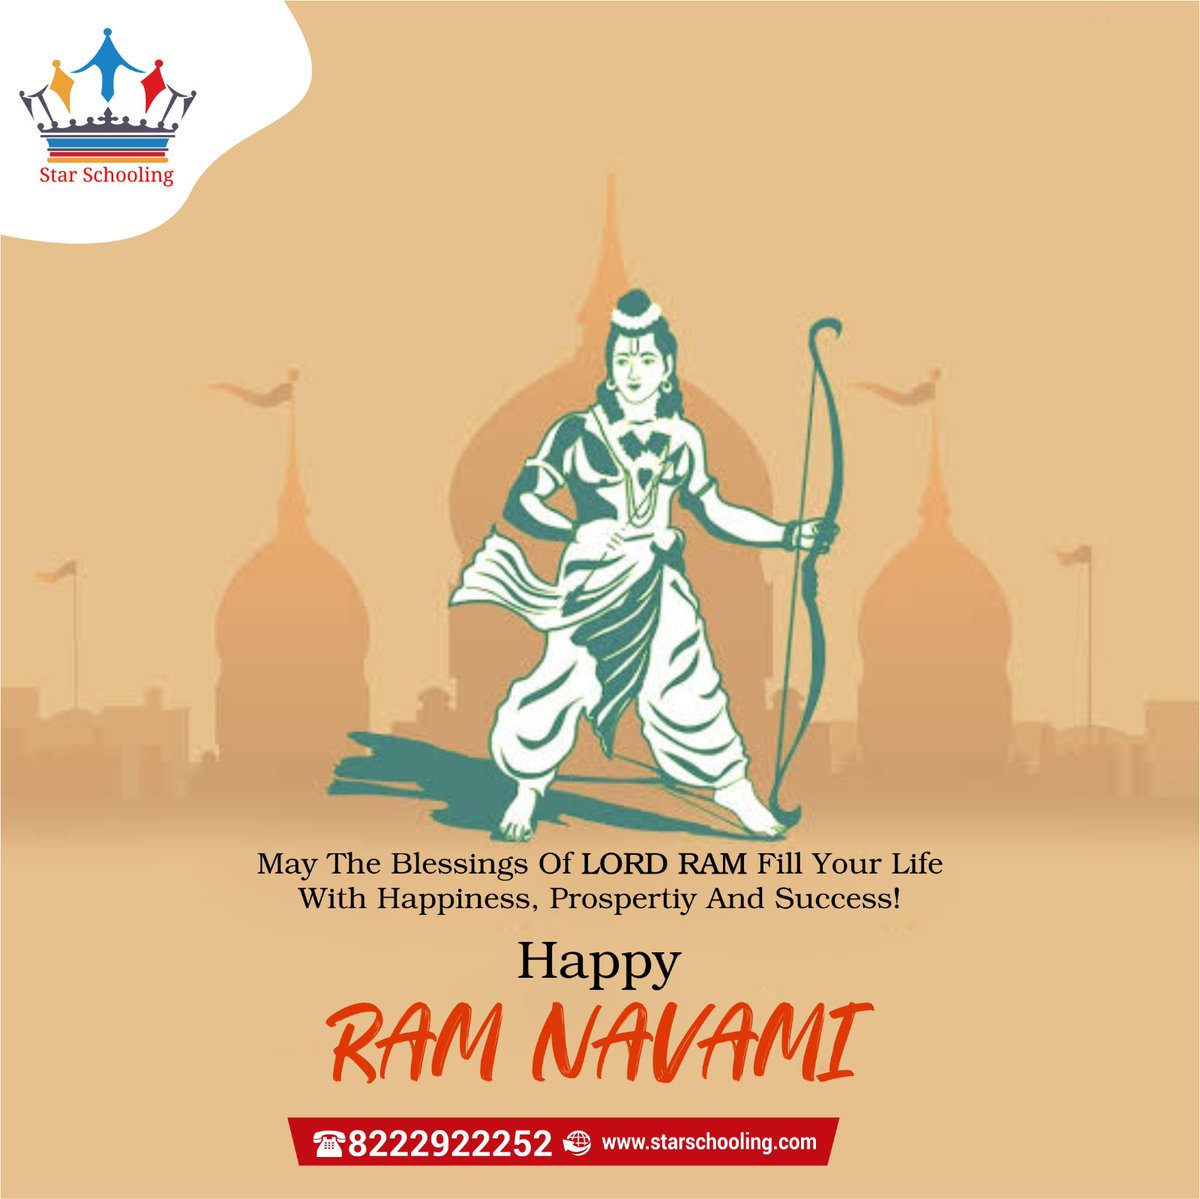 Happy Ram Navmi! 🌟

𝕾𝖙𝖆𝖗 𝕾𝖈𝖍𝖔𝖔𝖑𝖎𝖓𝖌 wishes you a delightful and divine Ram Navmi! May Lord Rama's wisdom and strength guide you towards excellence and success. 🏹✨

May this special day be filled with joy, peace, and prosperity for you and your loved ones. 🙏🎉